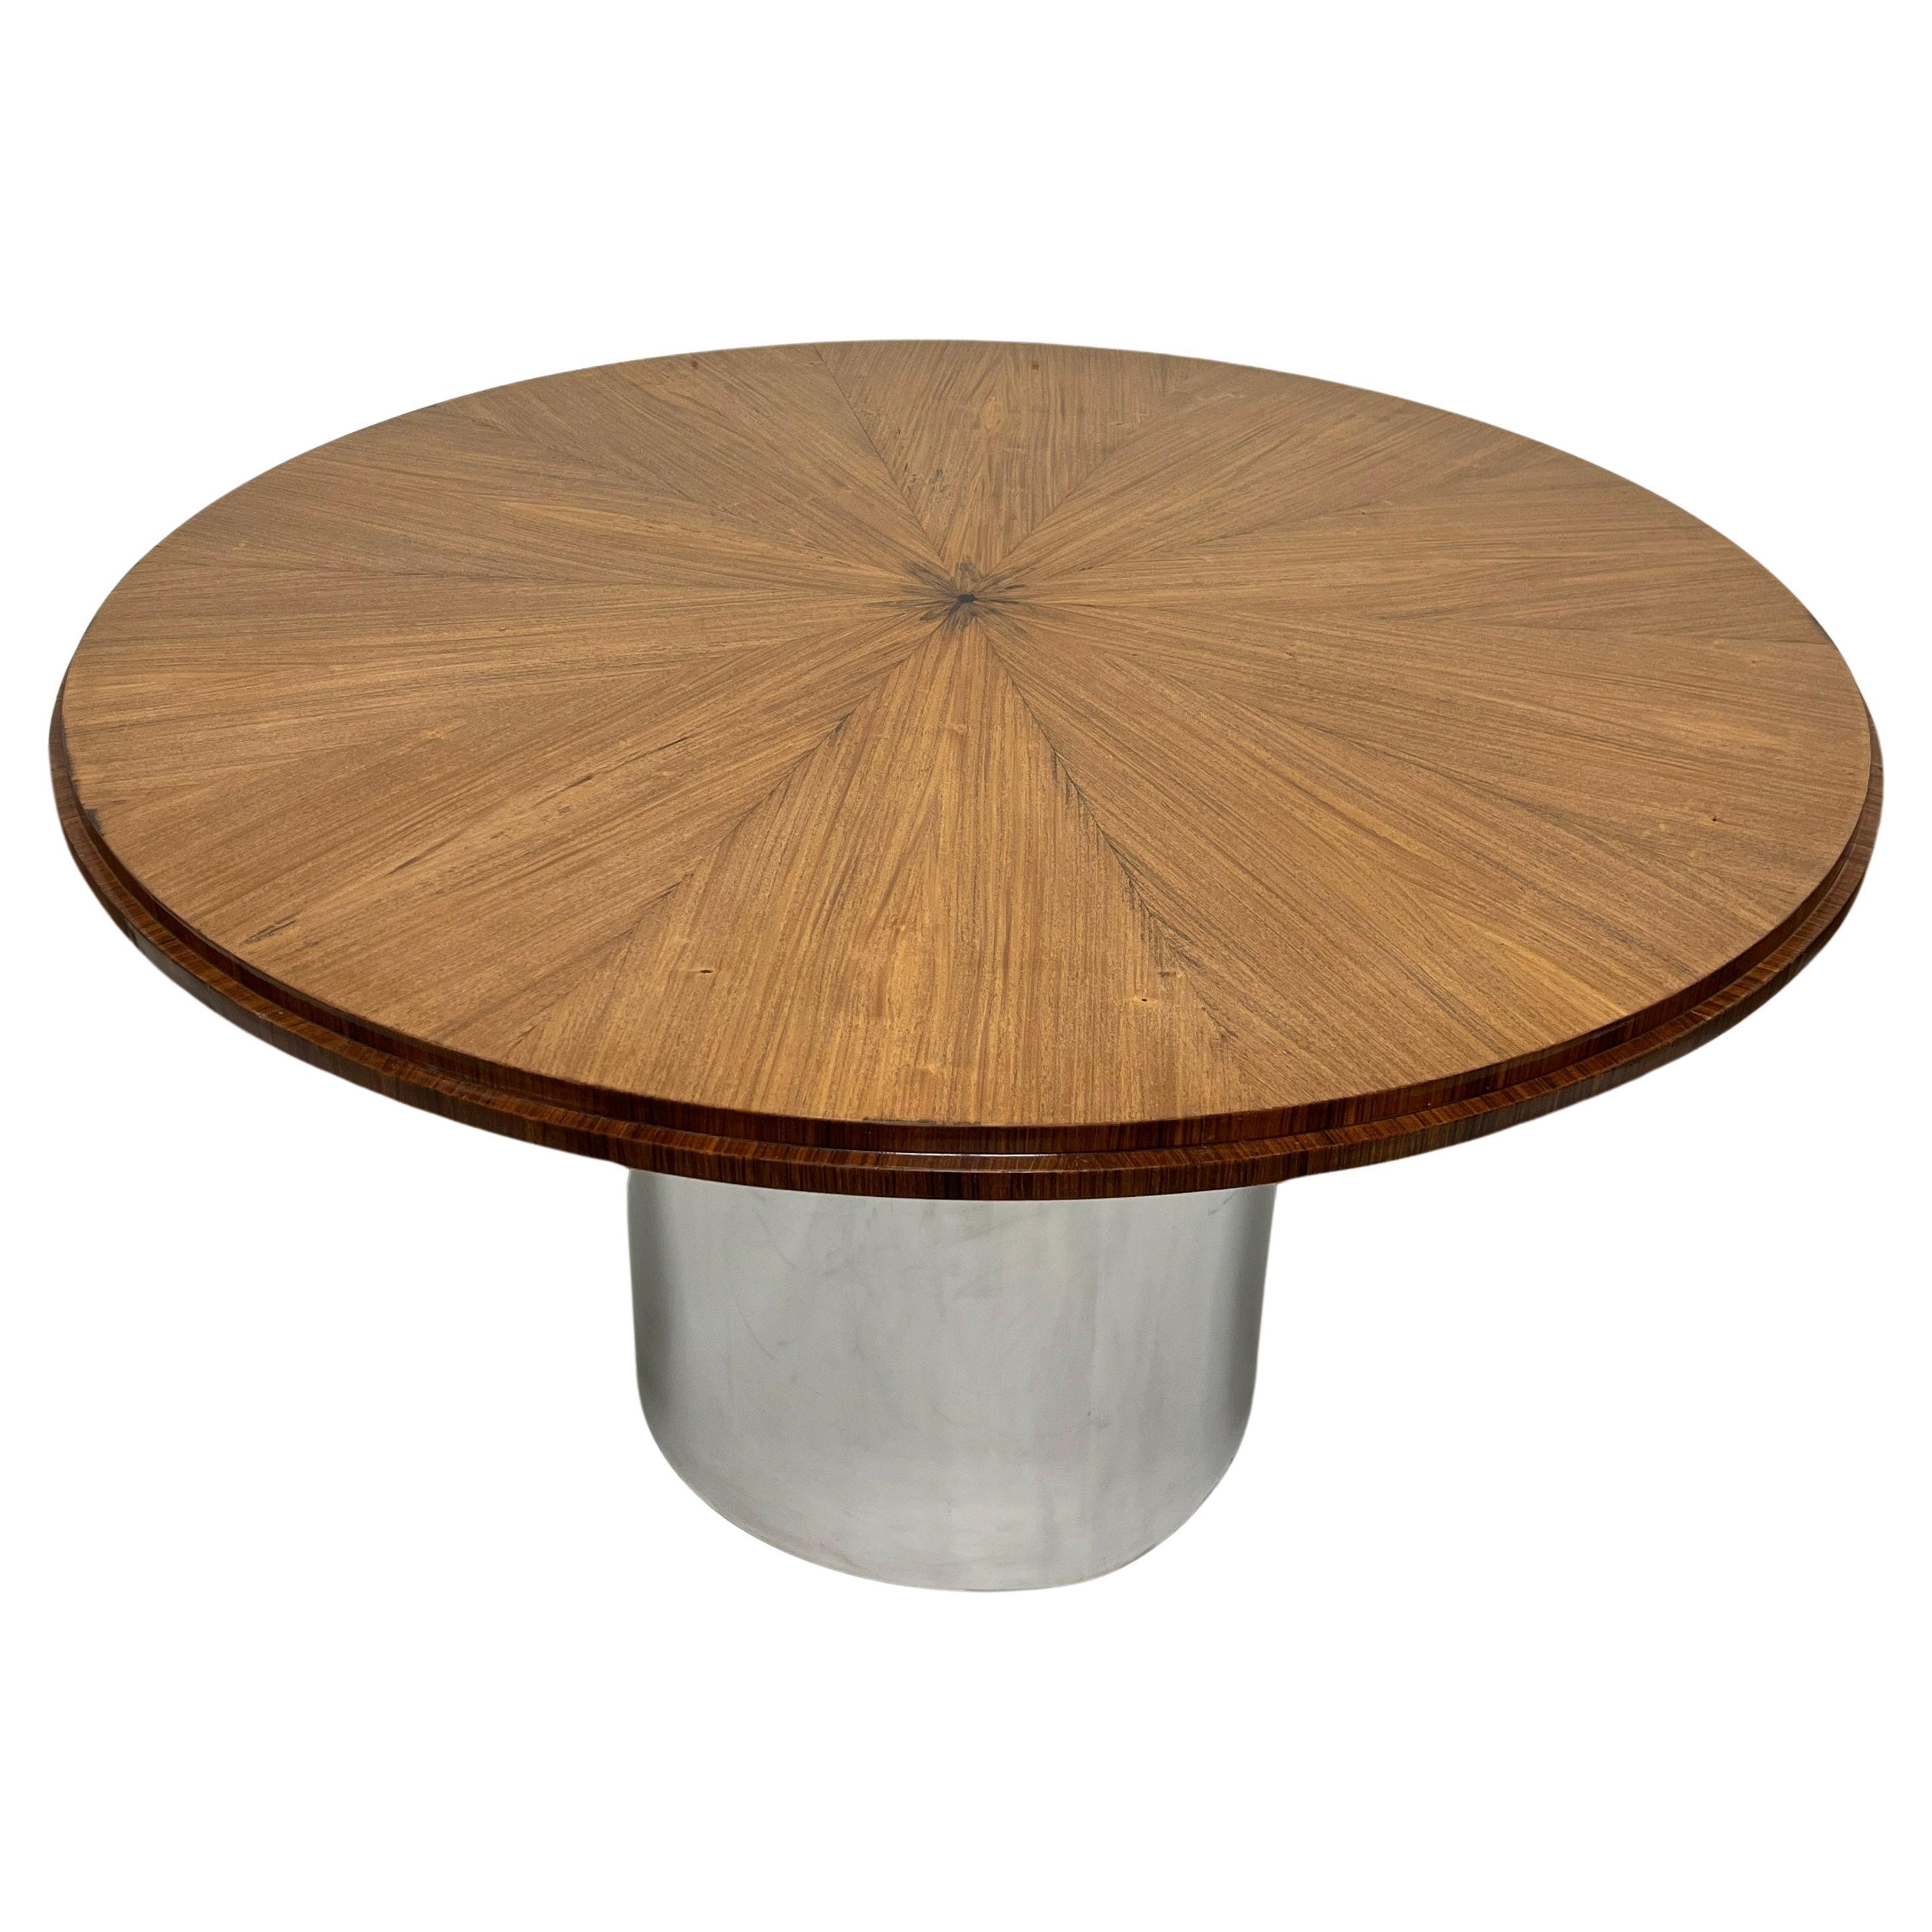 Radial Mahogany Expandable Dining Table in Manner of Karl Springer, Ca. 1970s